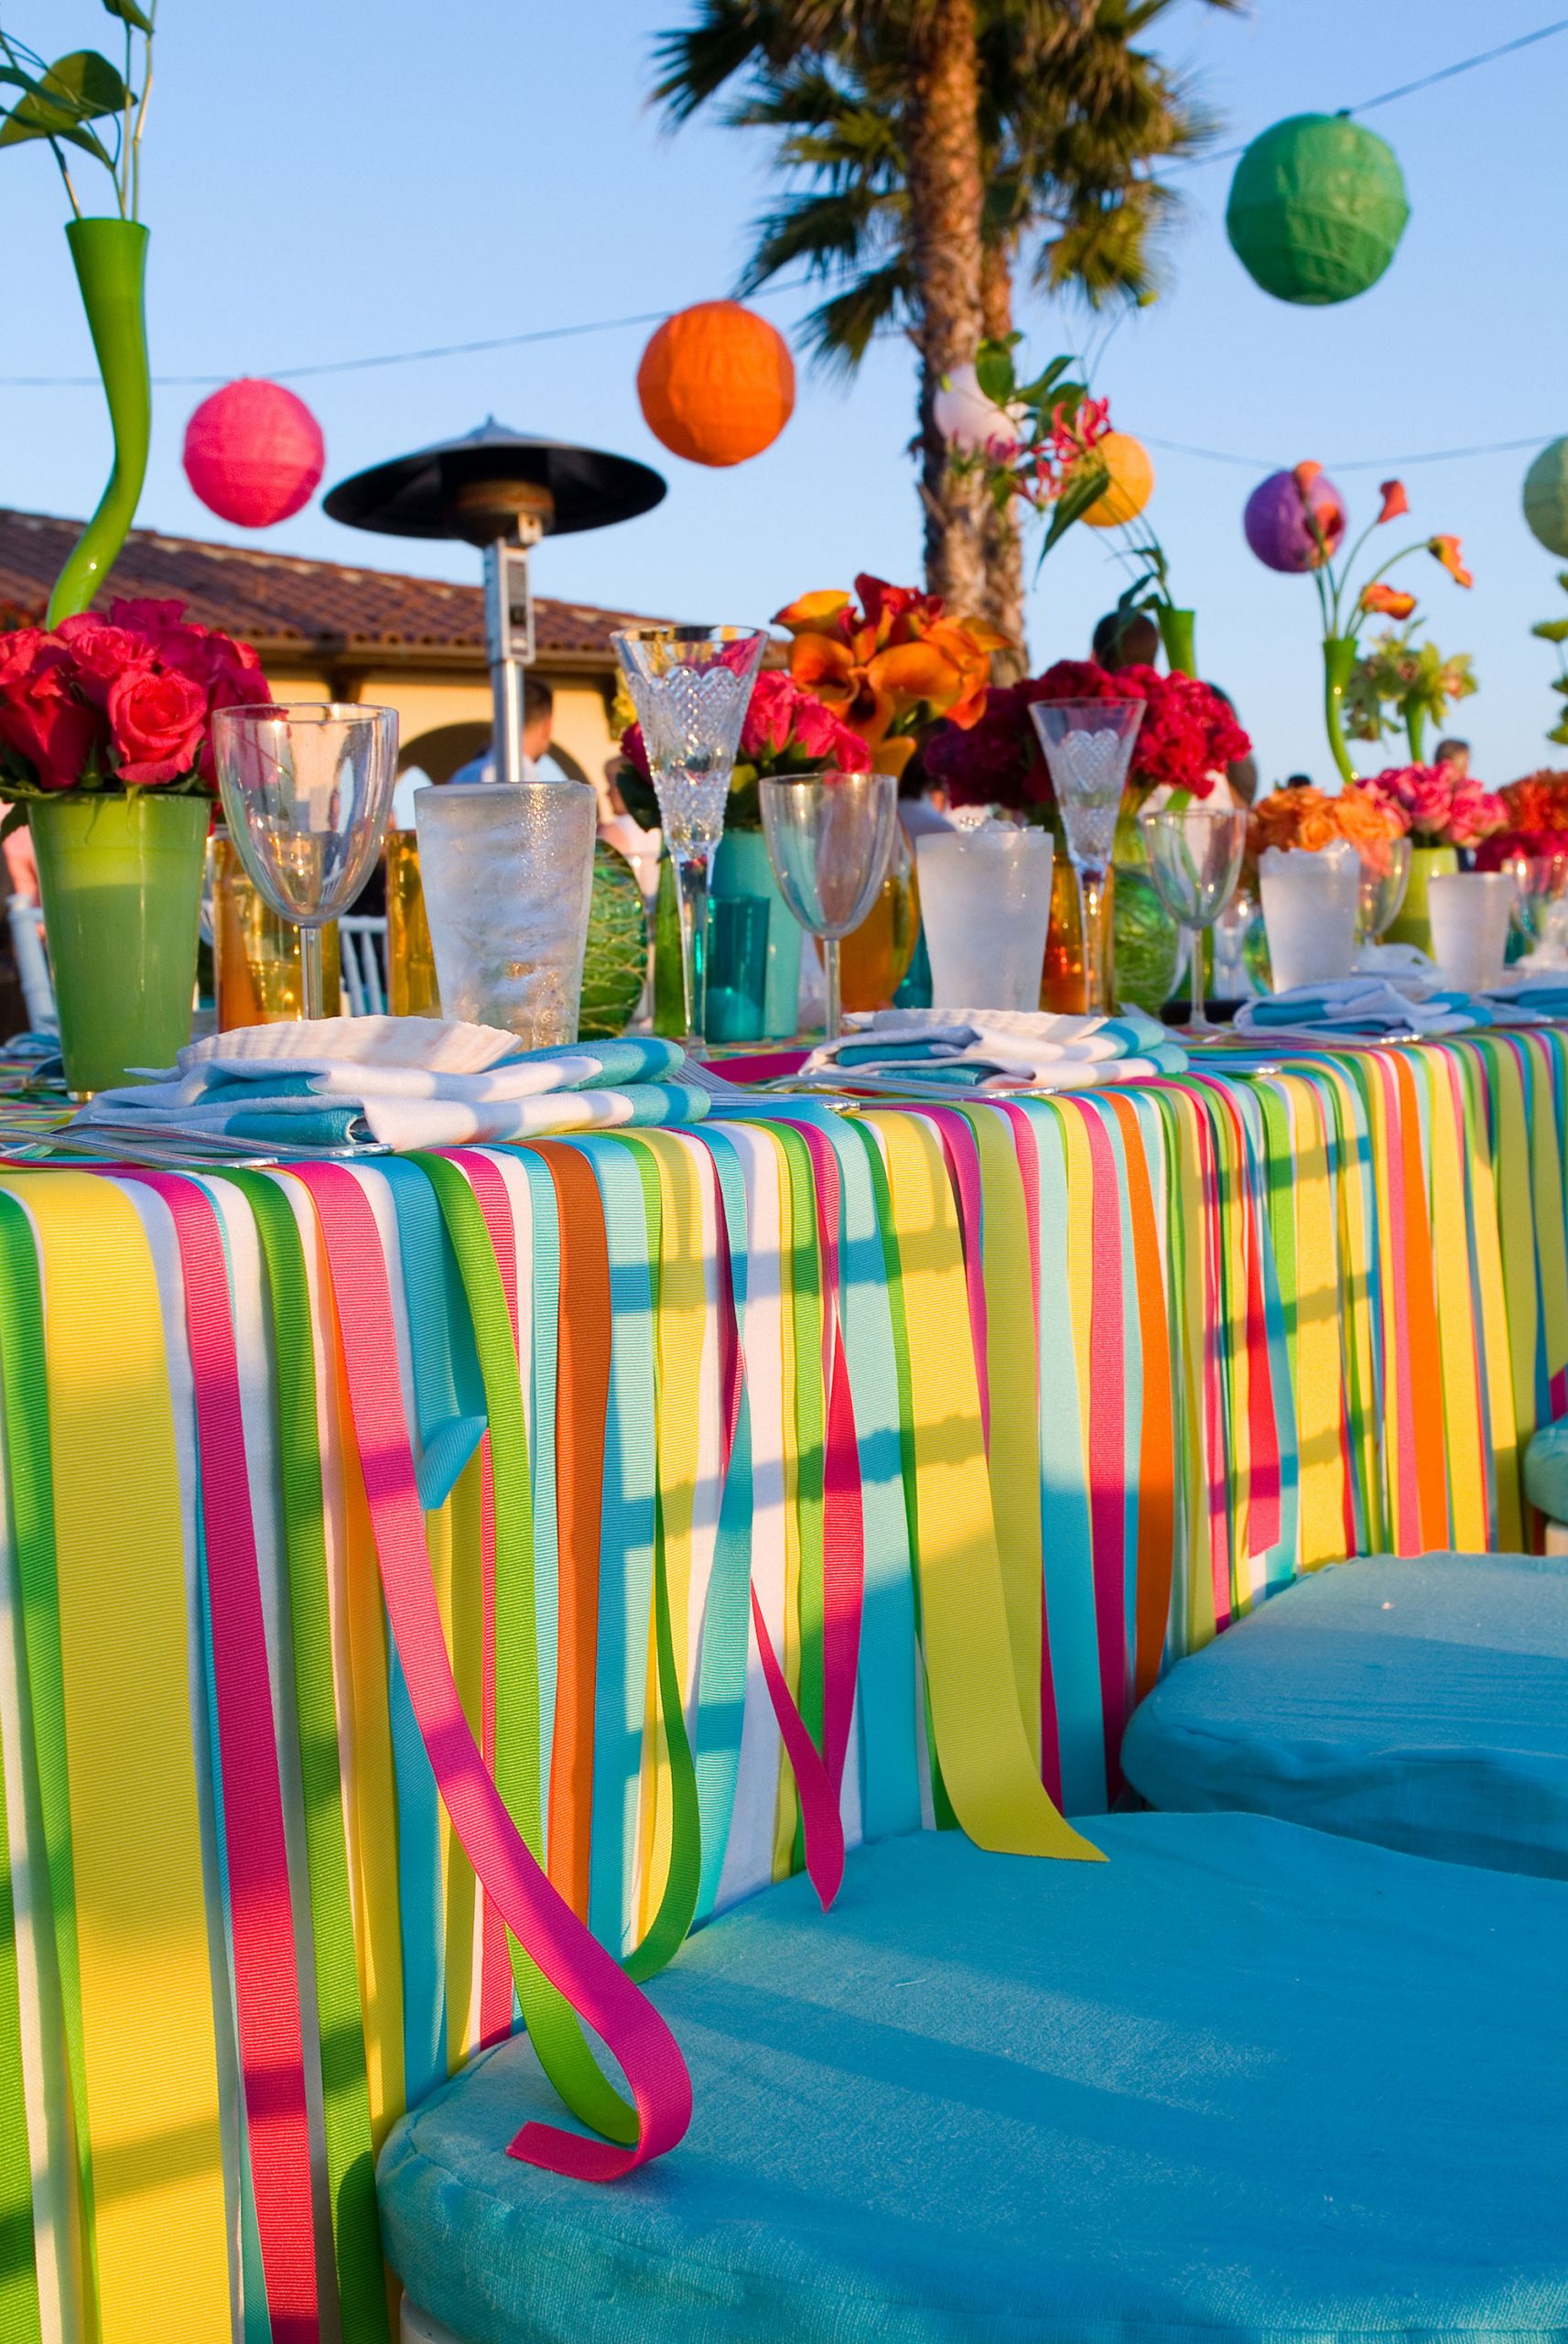 Party In Backyard Ideas
 Backyard Party Ideas How To Throw An Outdoor Party